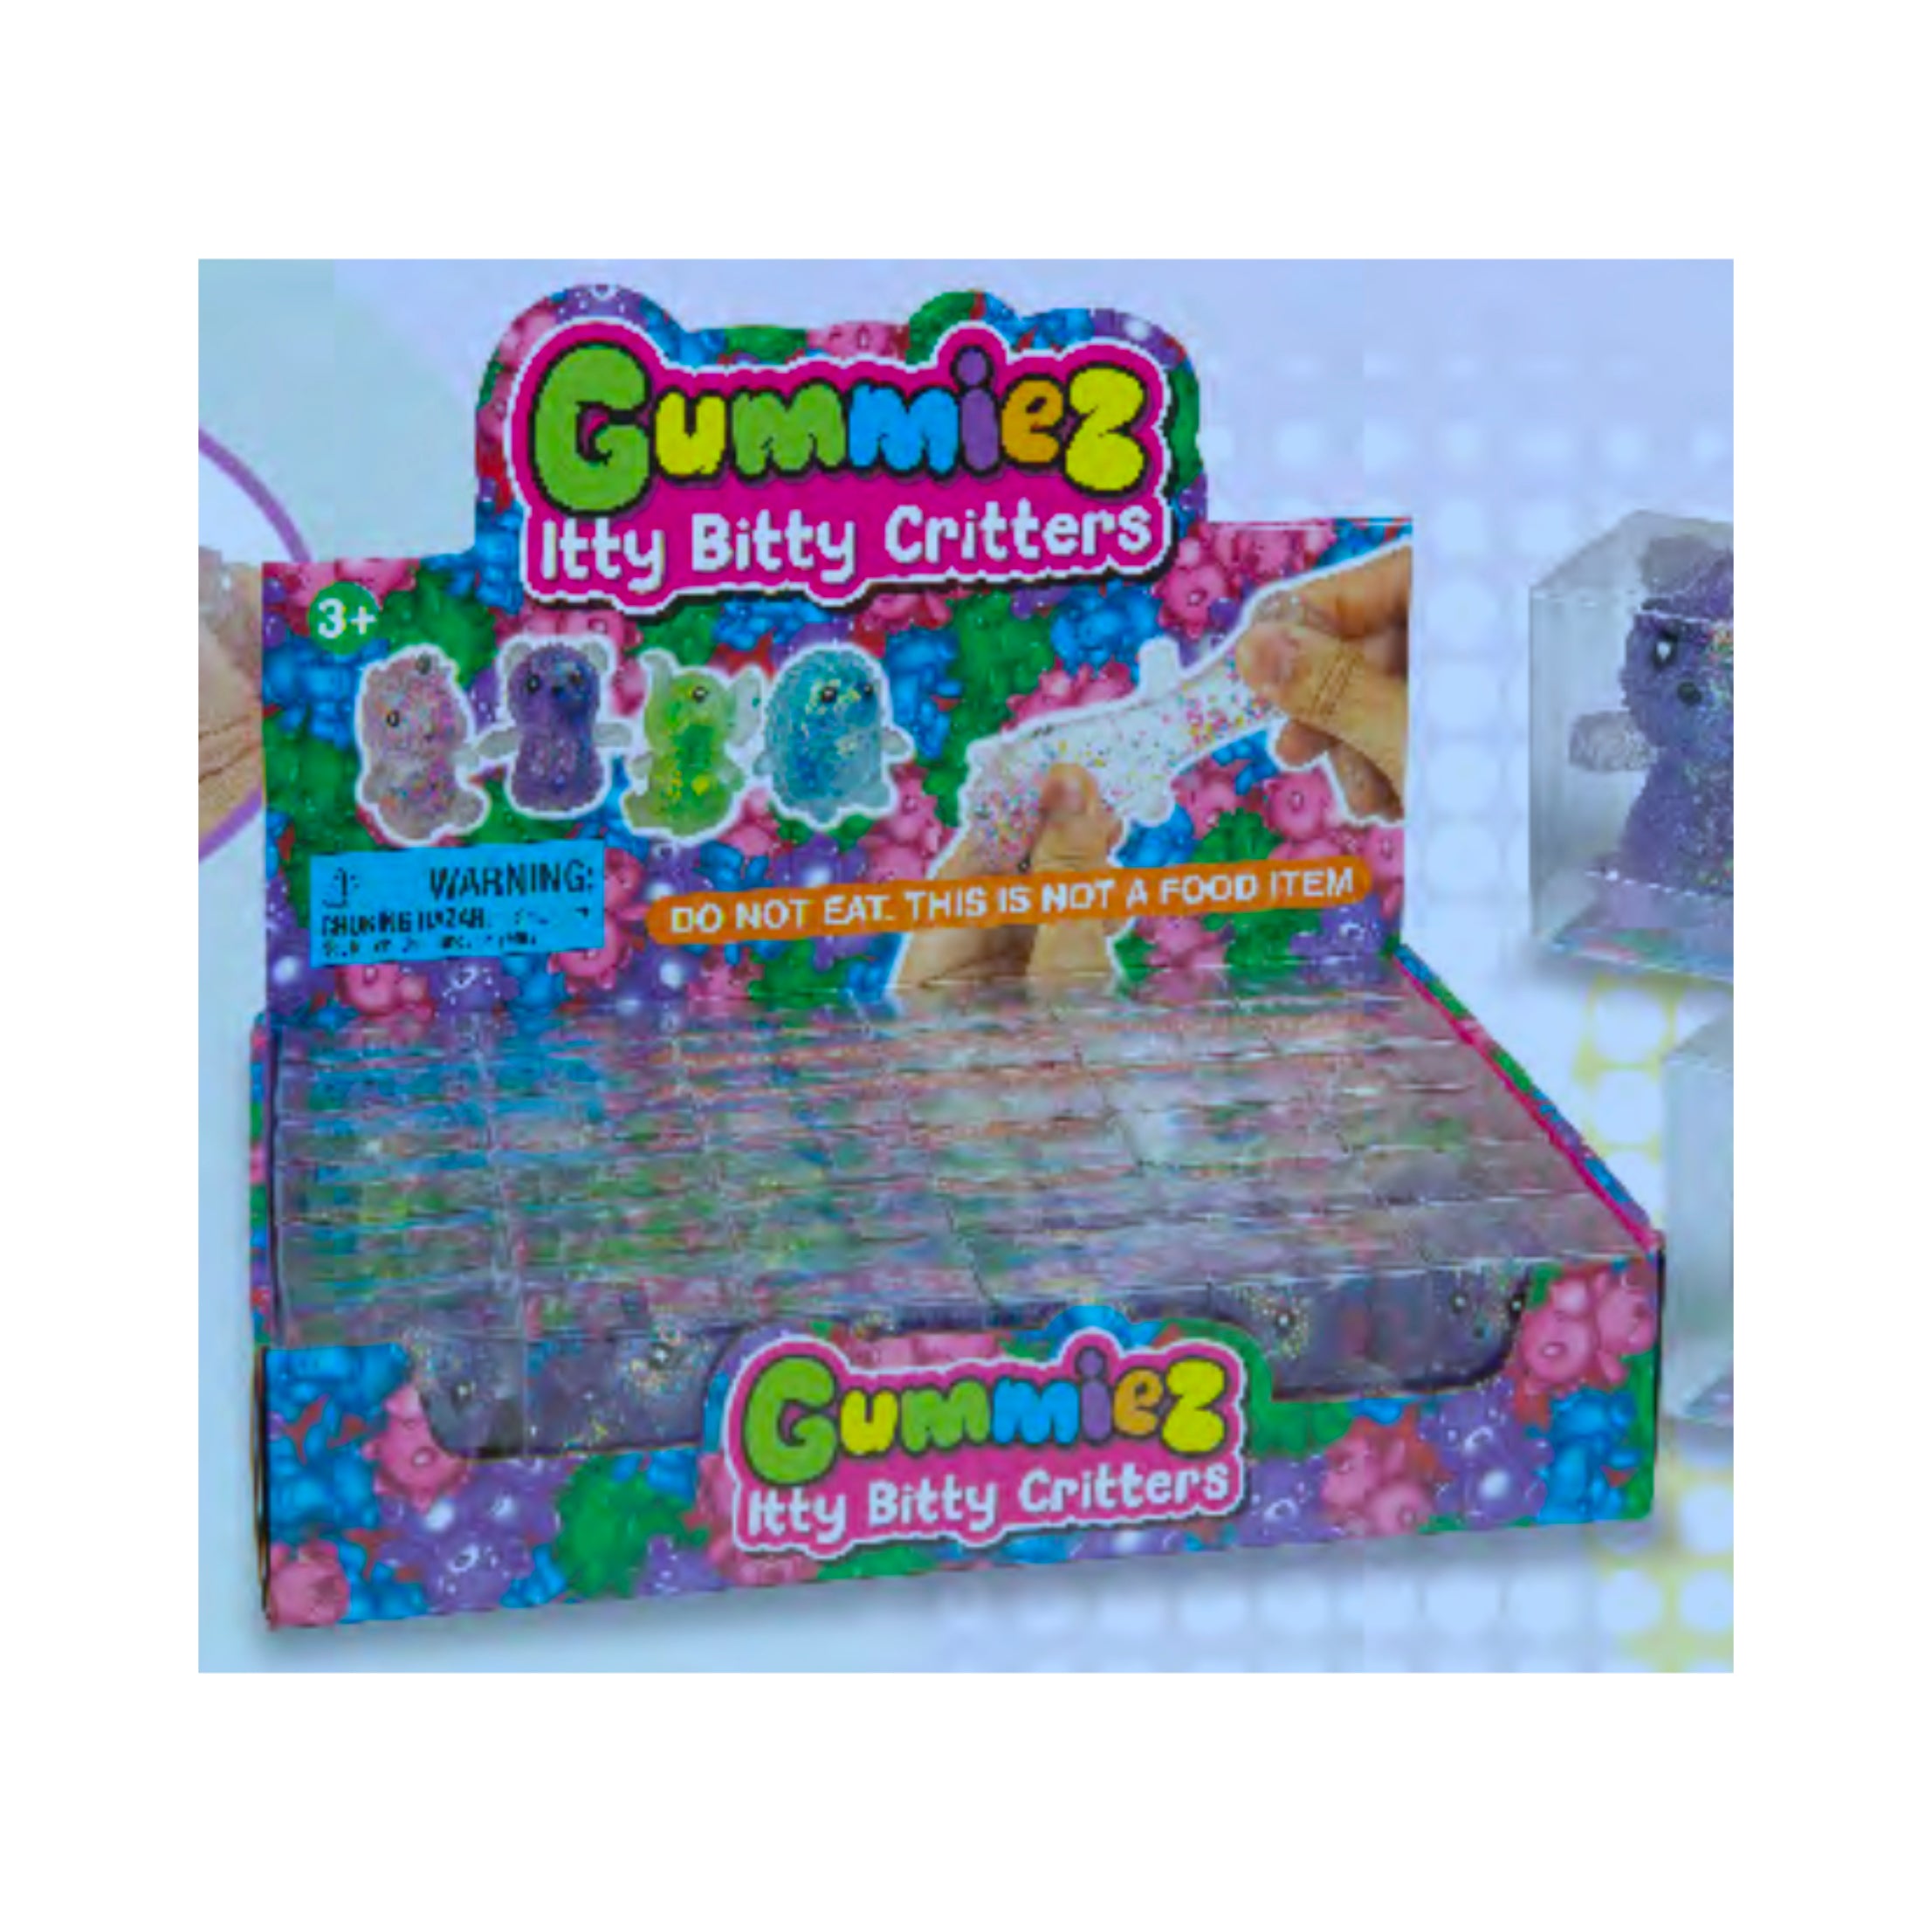 Gummiez Itty Bitty Critters Super Fun Squish Toy – Assorted Colors - Sold Individually